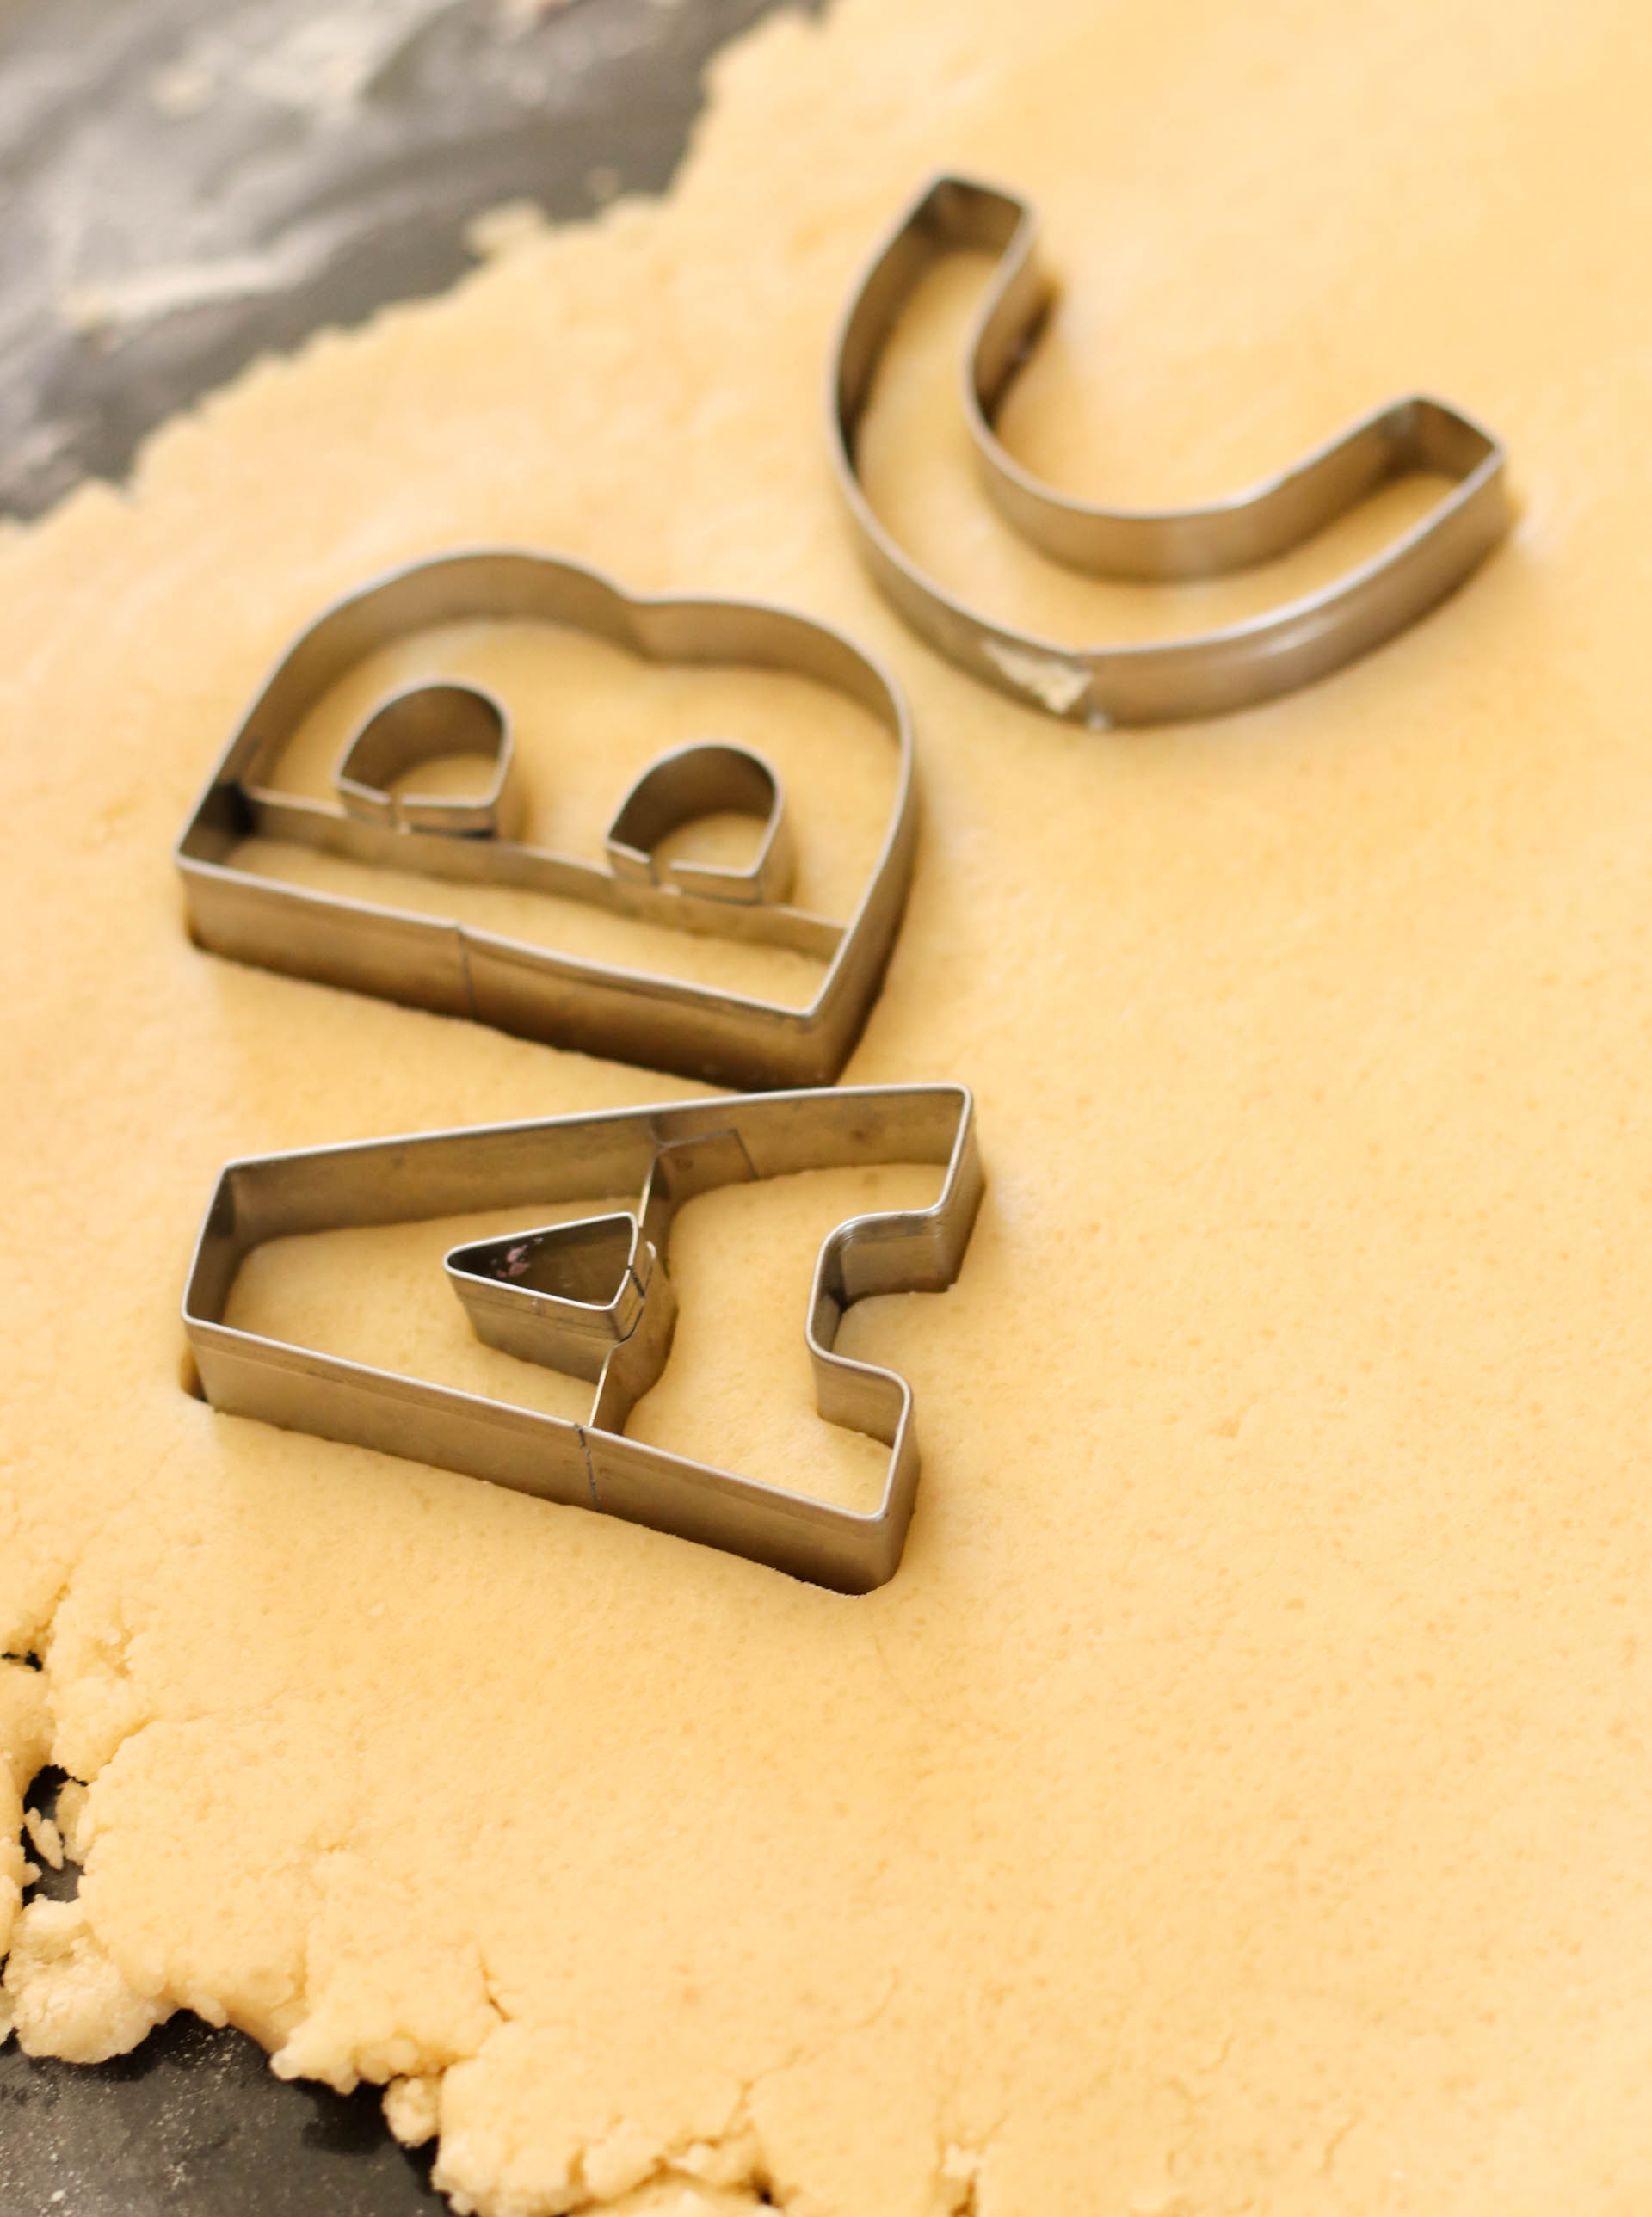 Cookie dough with alphabet cookie cutter